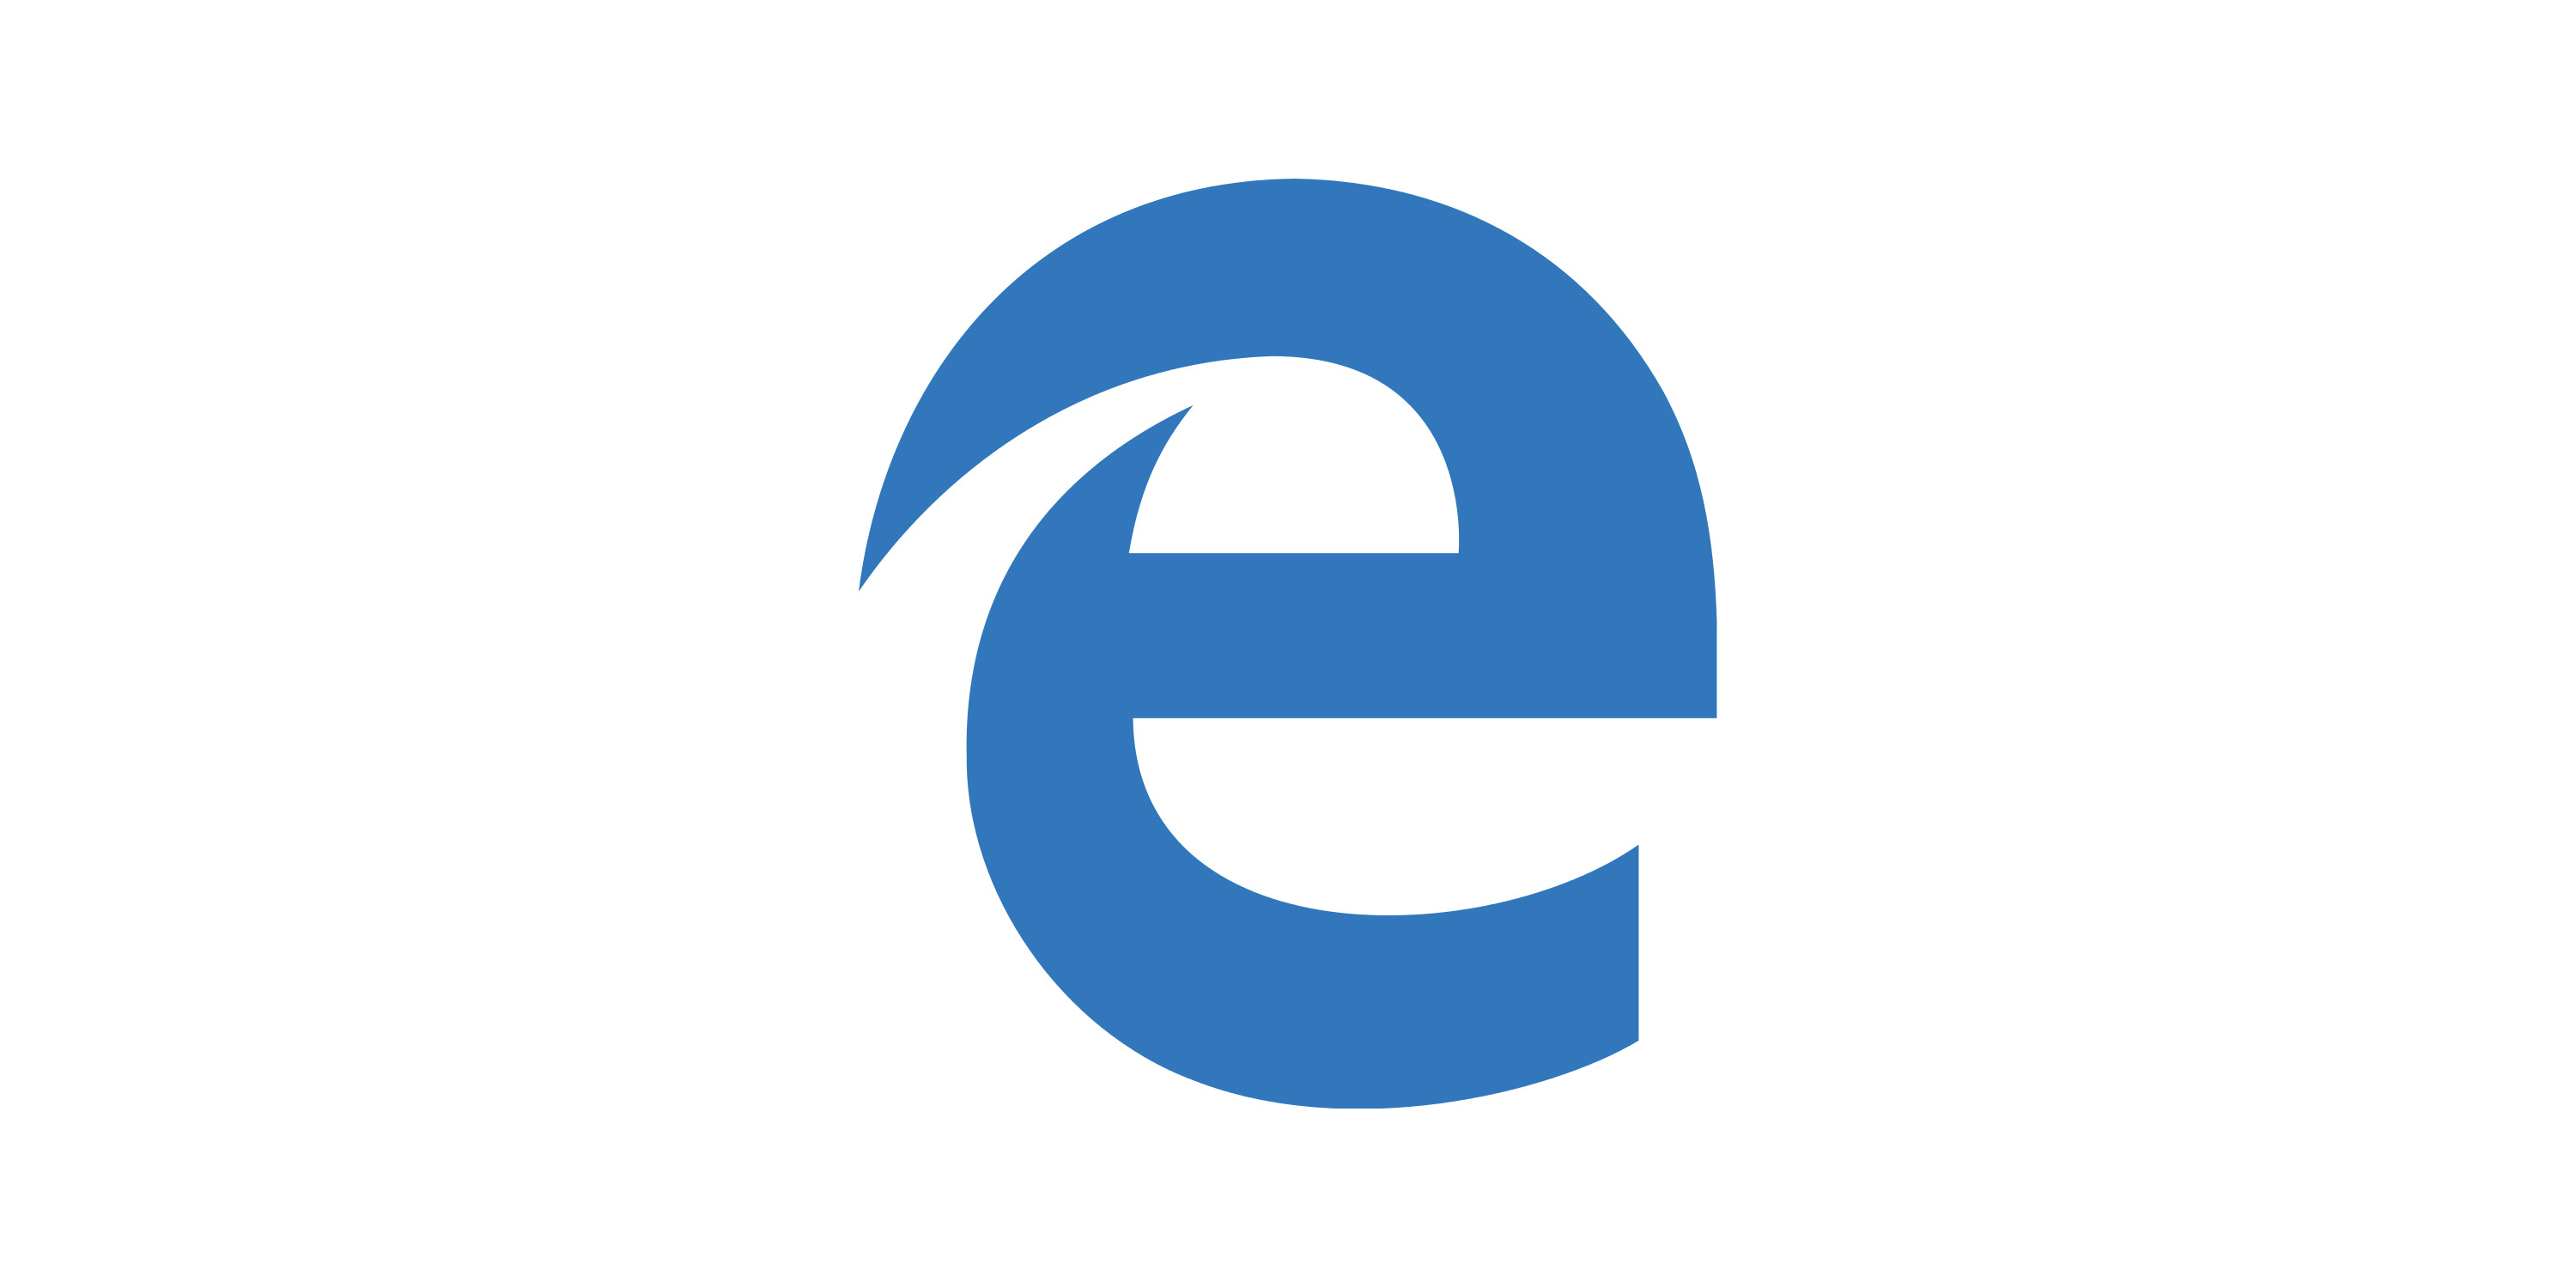 this app requires the latest version of microsoft edge